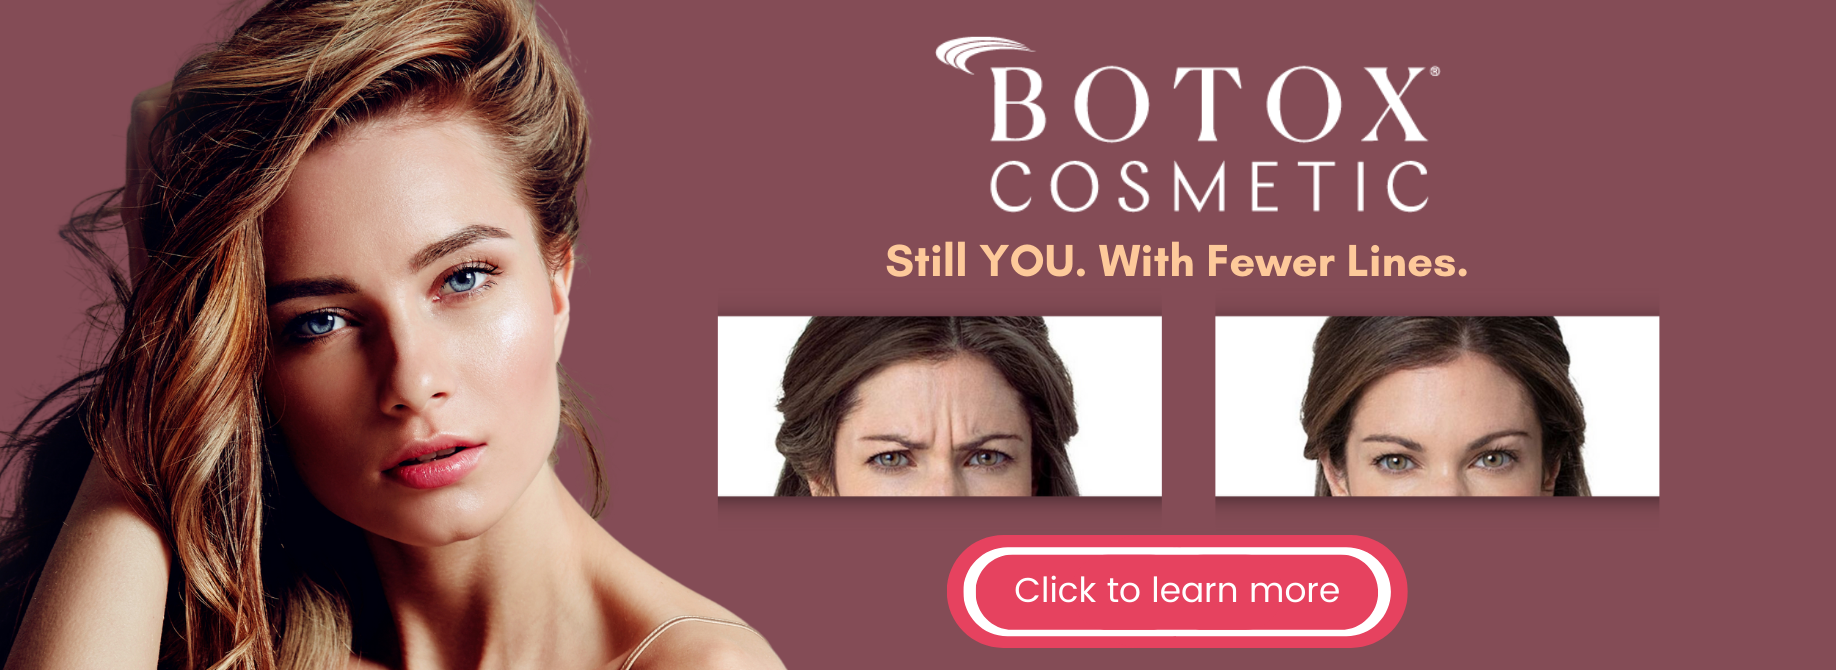 South Tampa Botox Cosmetic